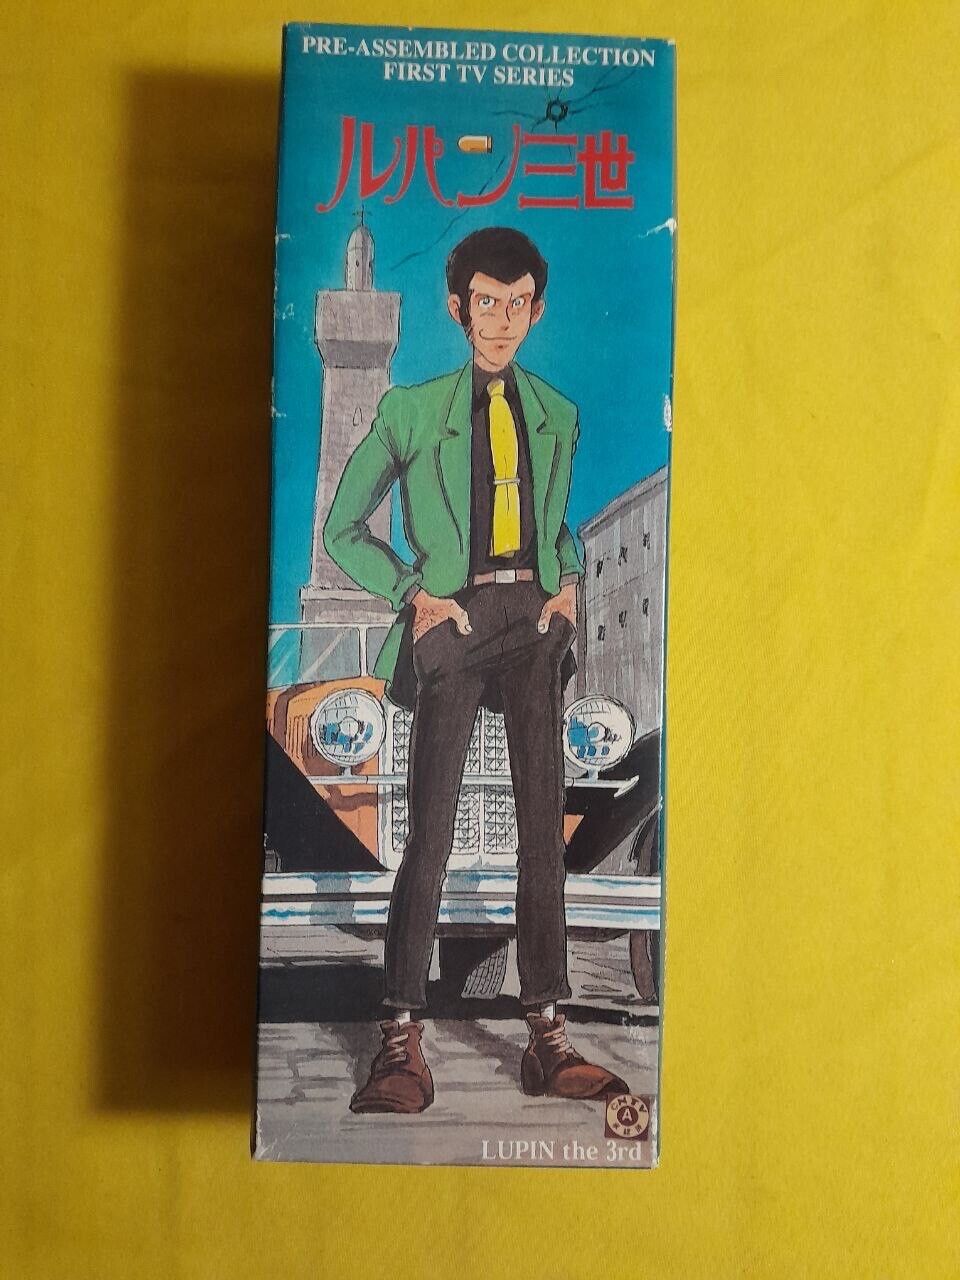 LUPIN THE 3RD MEDICOM TOY JAPAN FIRST TV SERIES GREEN SUIT 1/6 NEW US SELLER G5